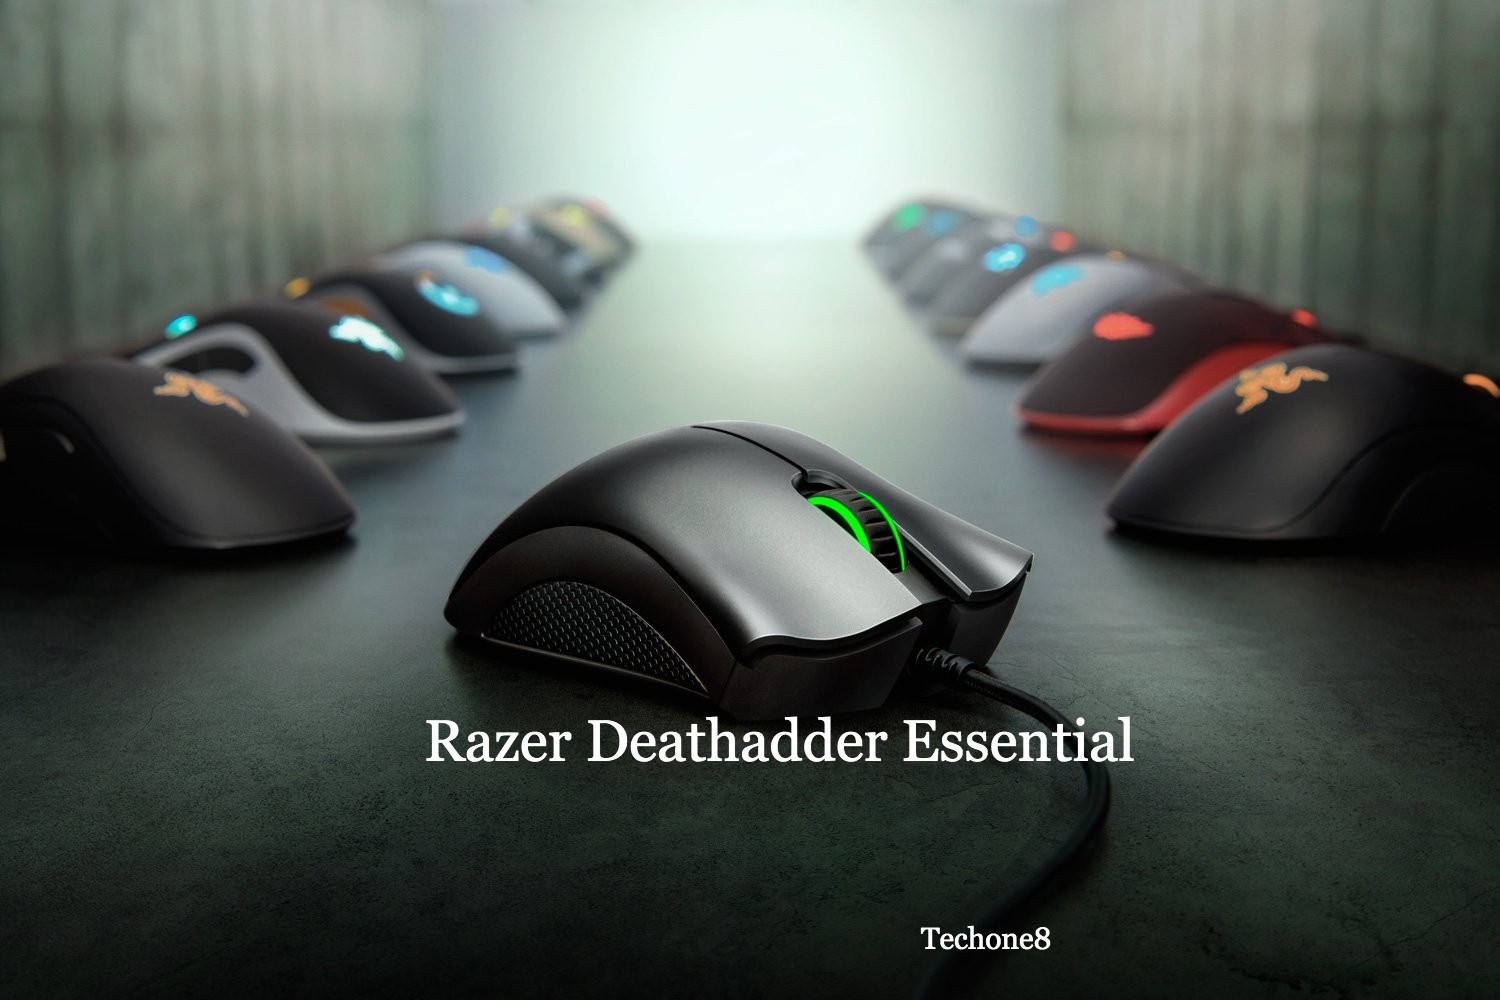 Razer Deathadder Essential Gaming Mouse For Just $20